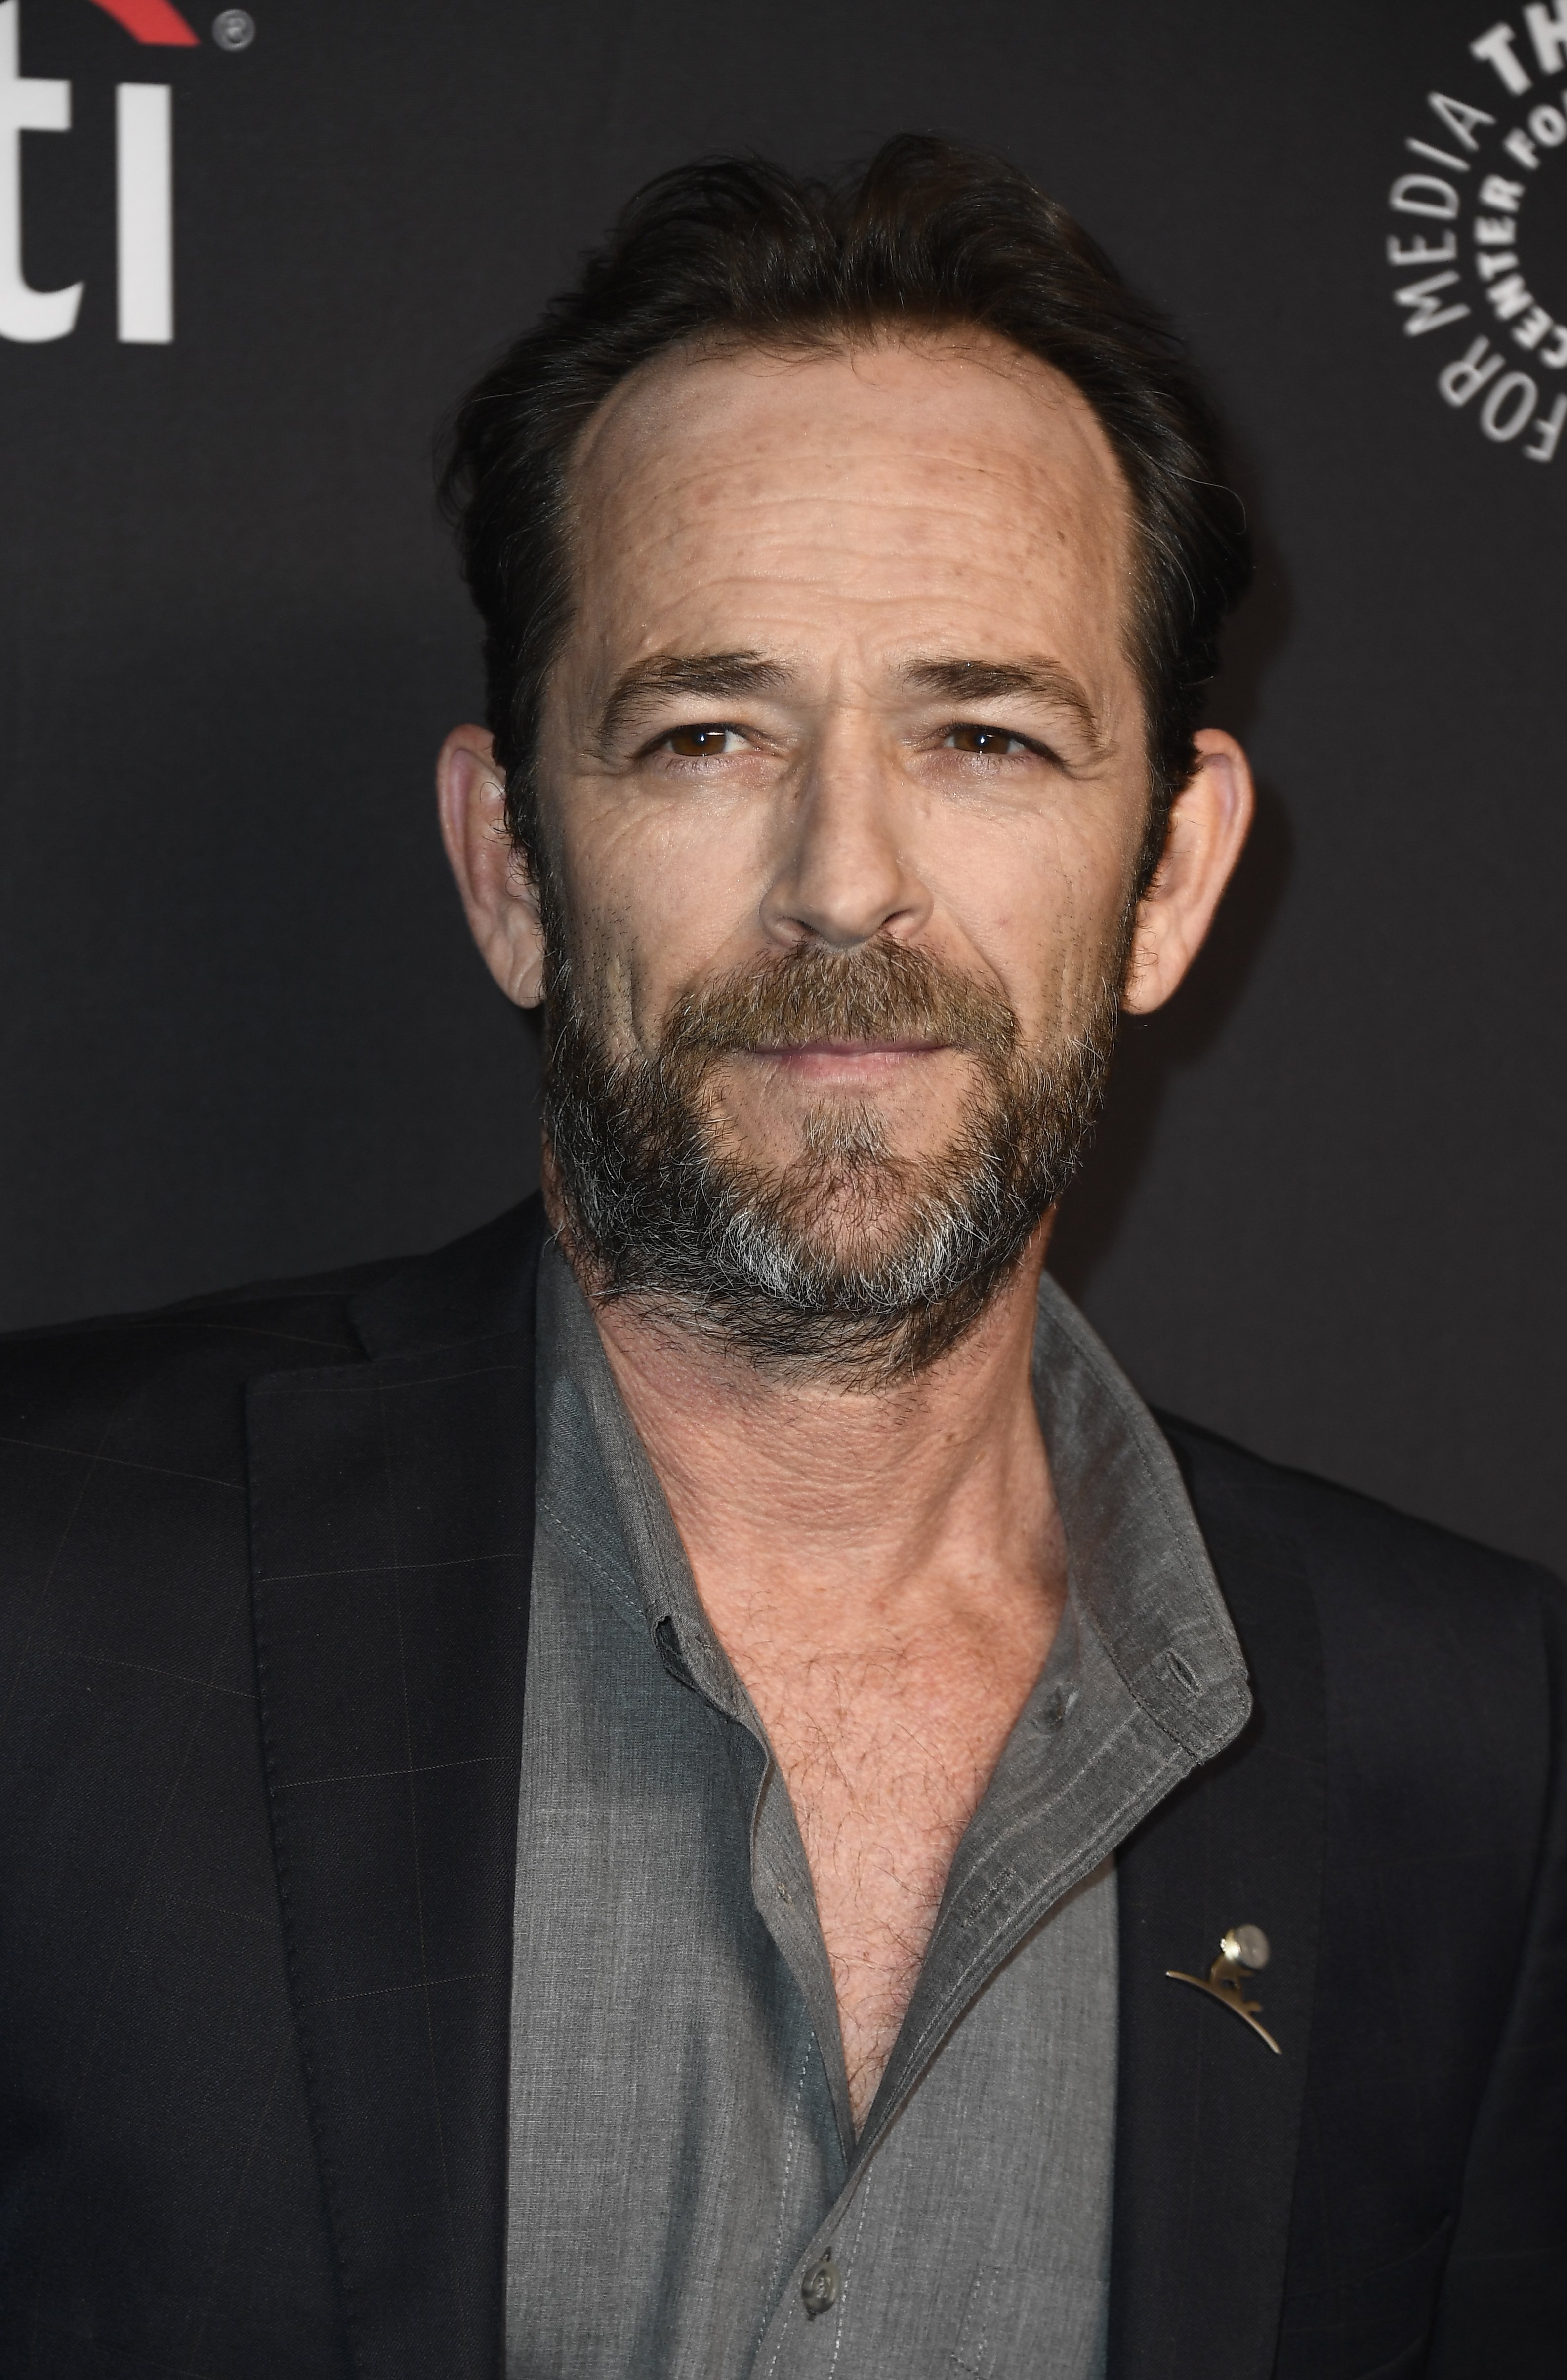 Luke Perry arrives for the 2018 PaleyFest Los Angeles | Photo: Getty Images